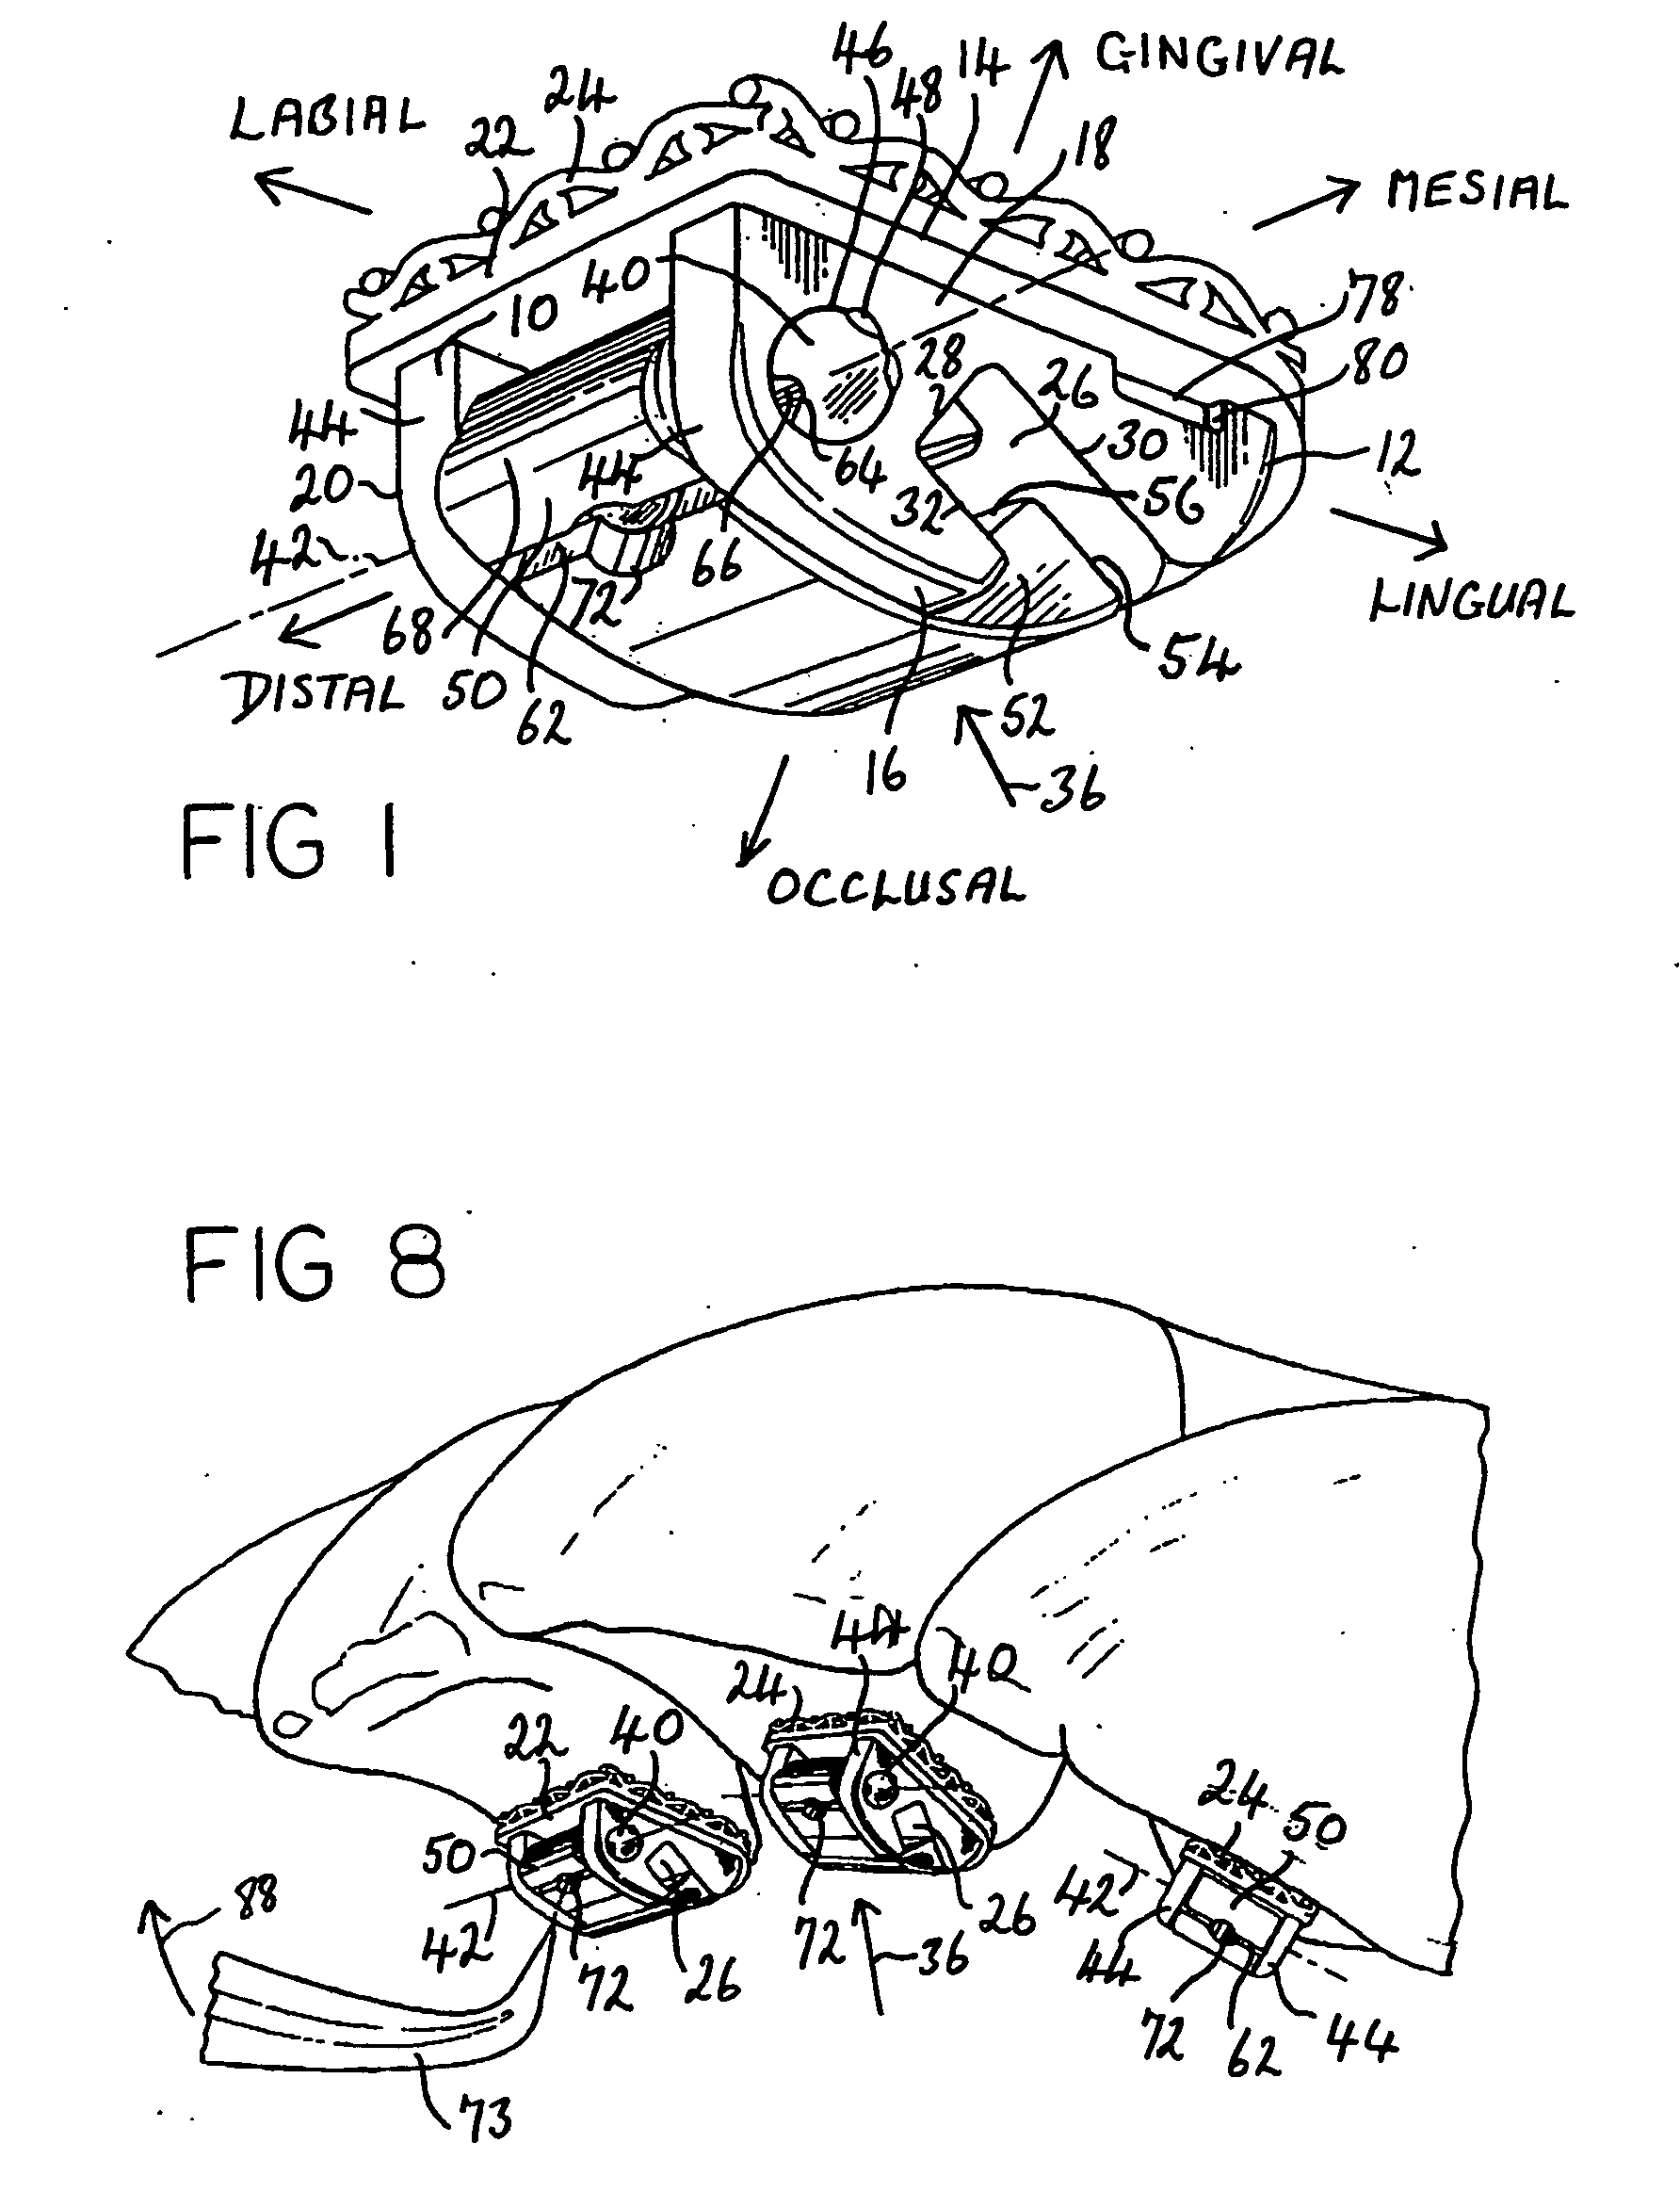 Orthodontic devices for use with arch wires